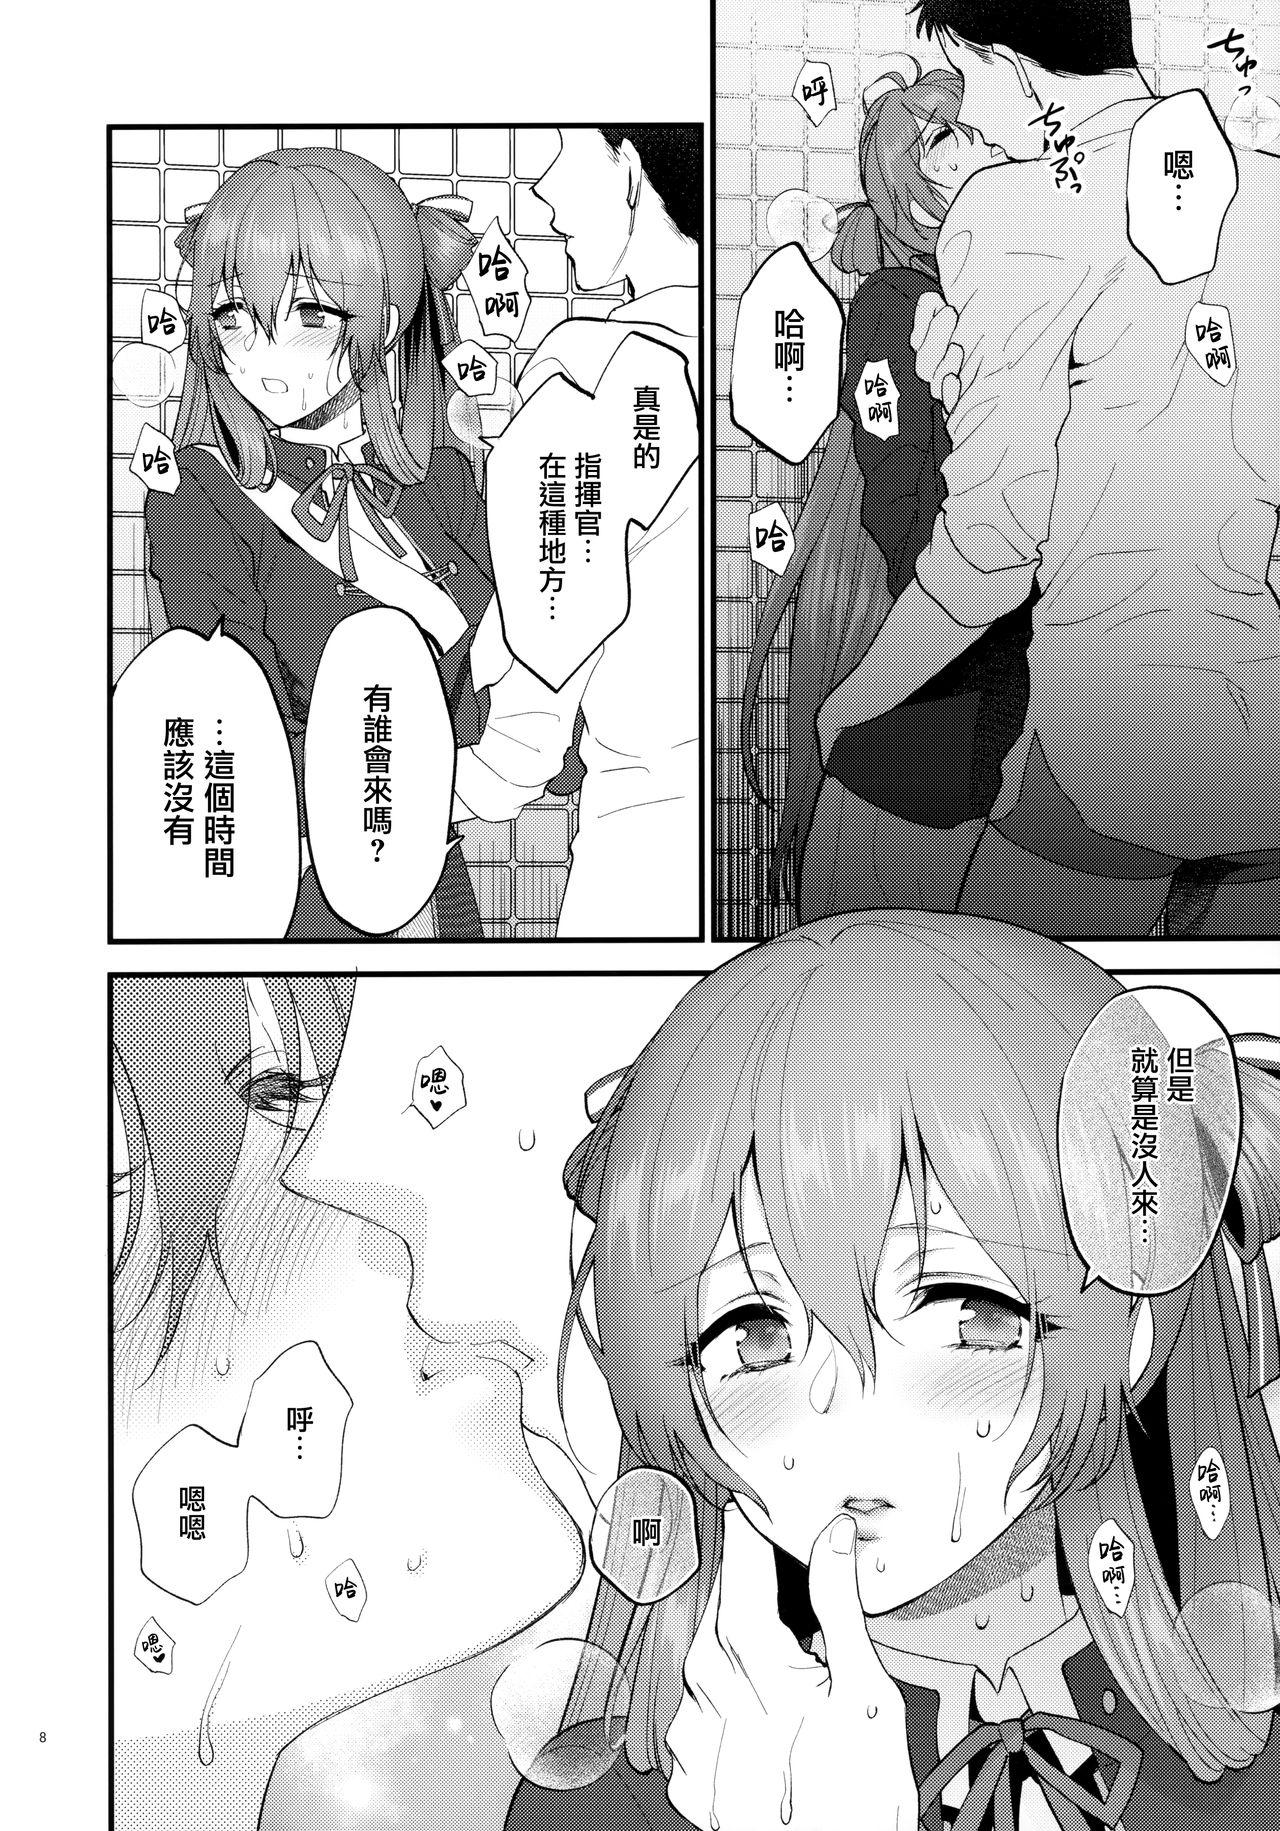 Sextoys Shower Room - Girls frontline Exotic - Page 7